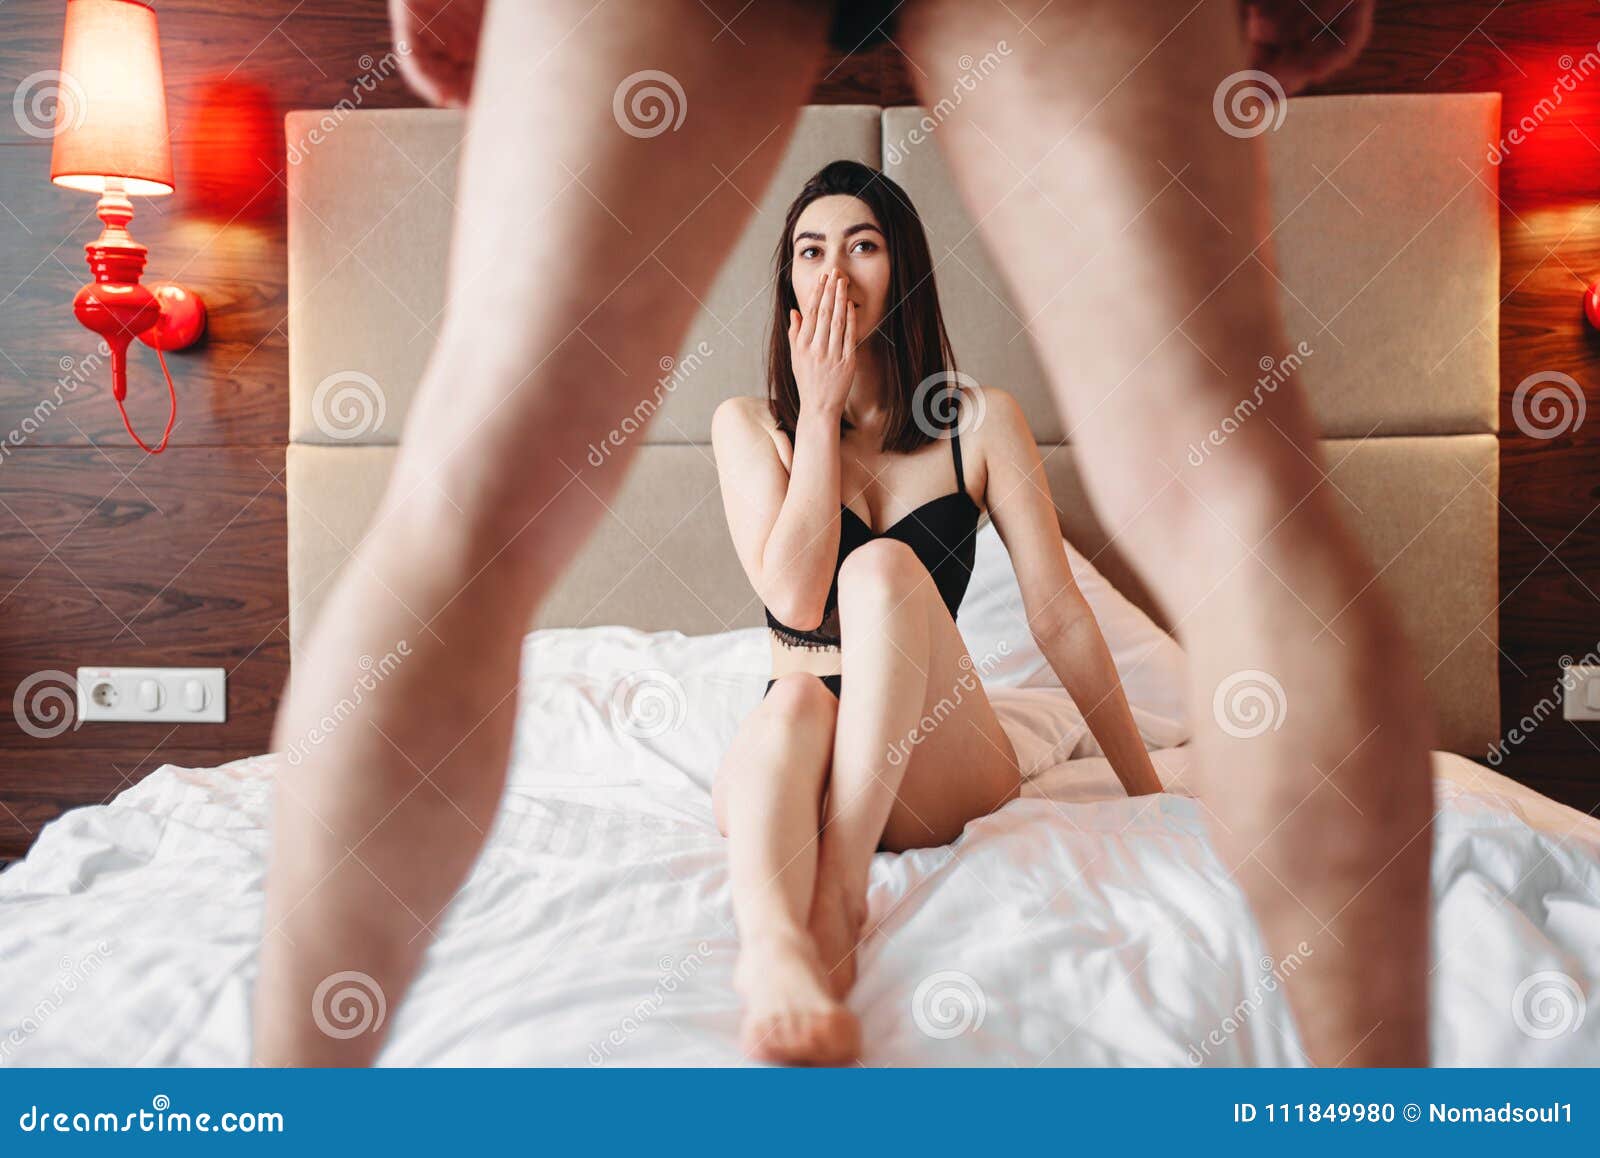 Sex Lovers in Bed, Big Surprise, Delight Stock Photo image